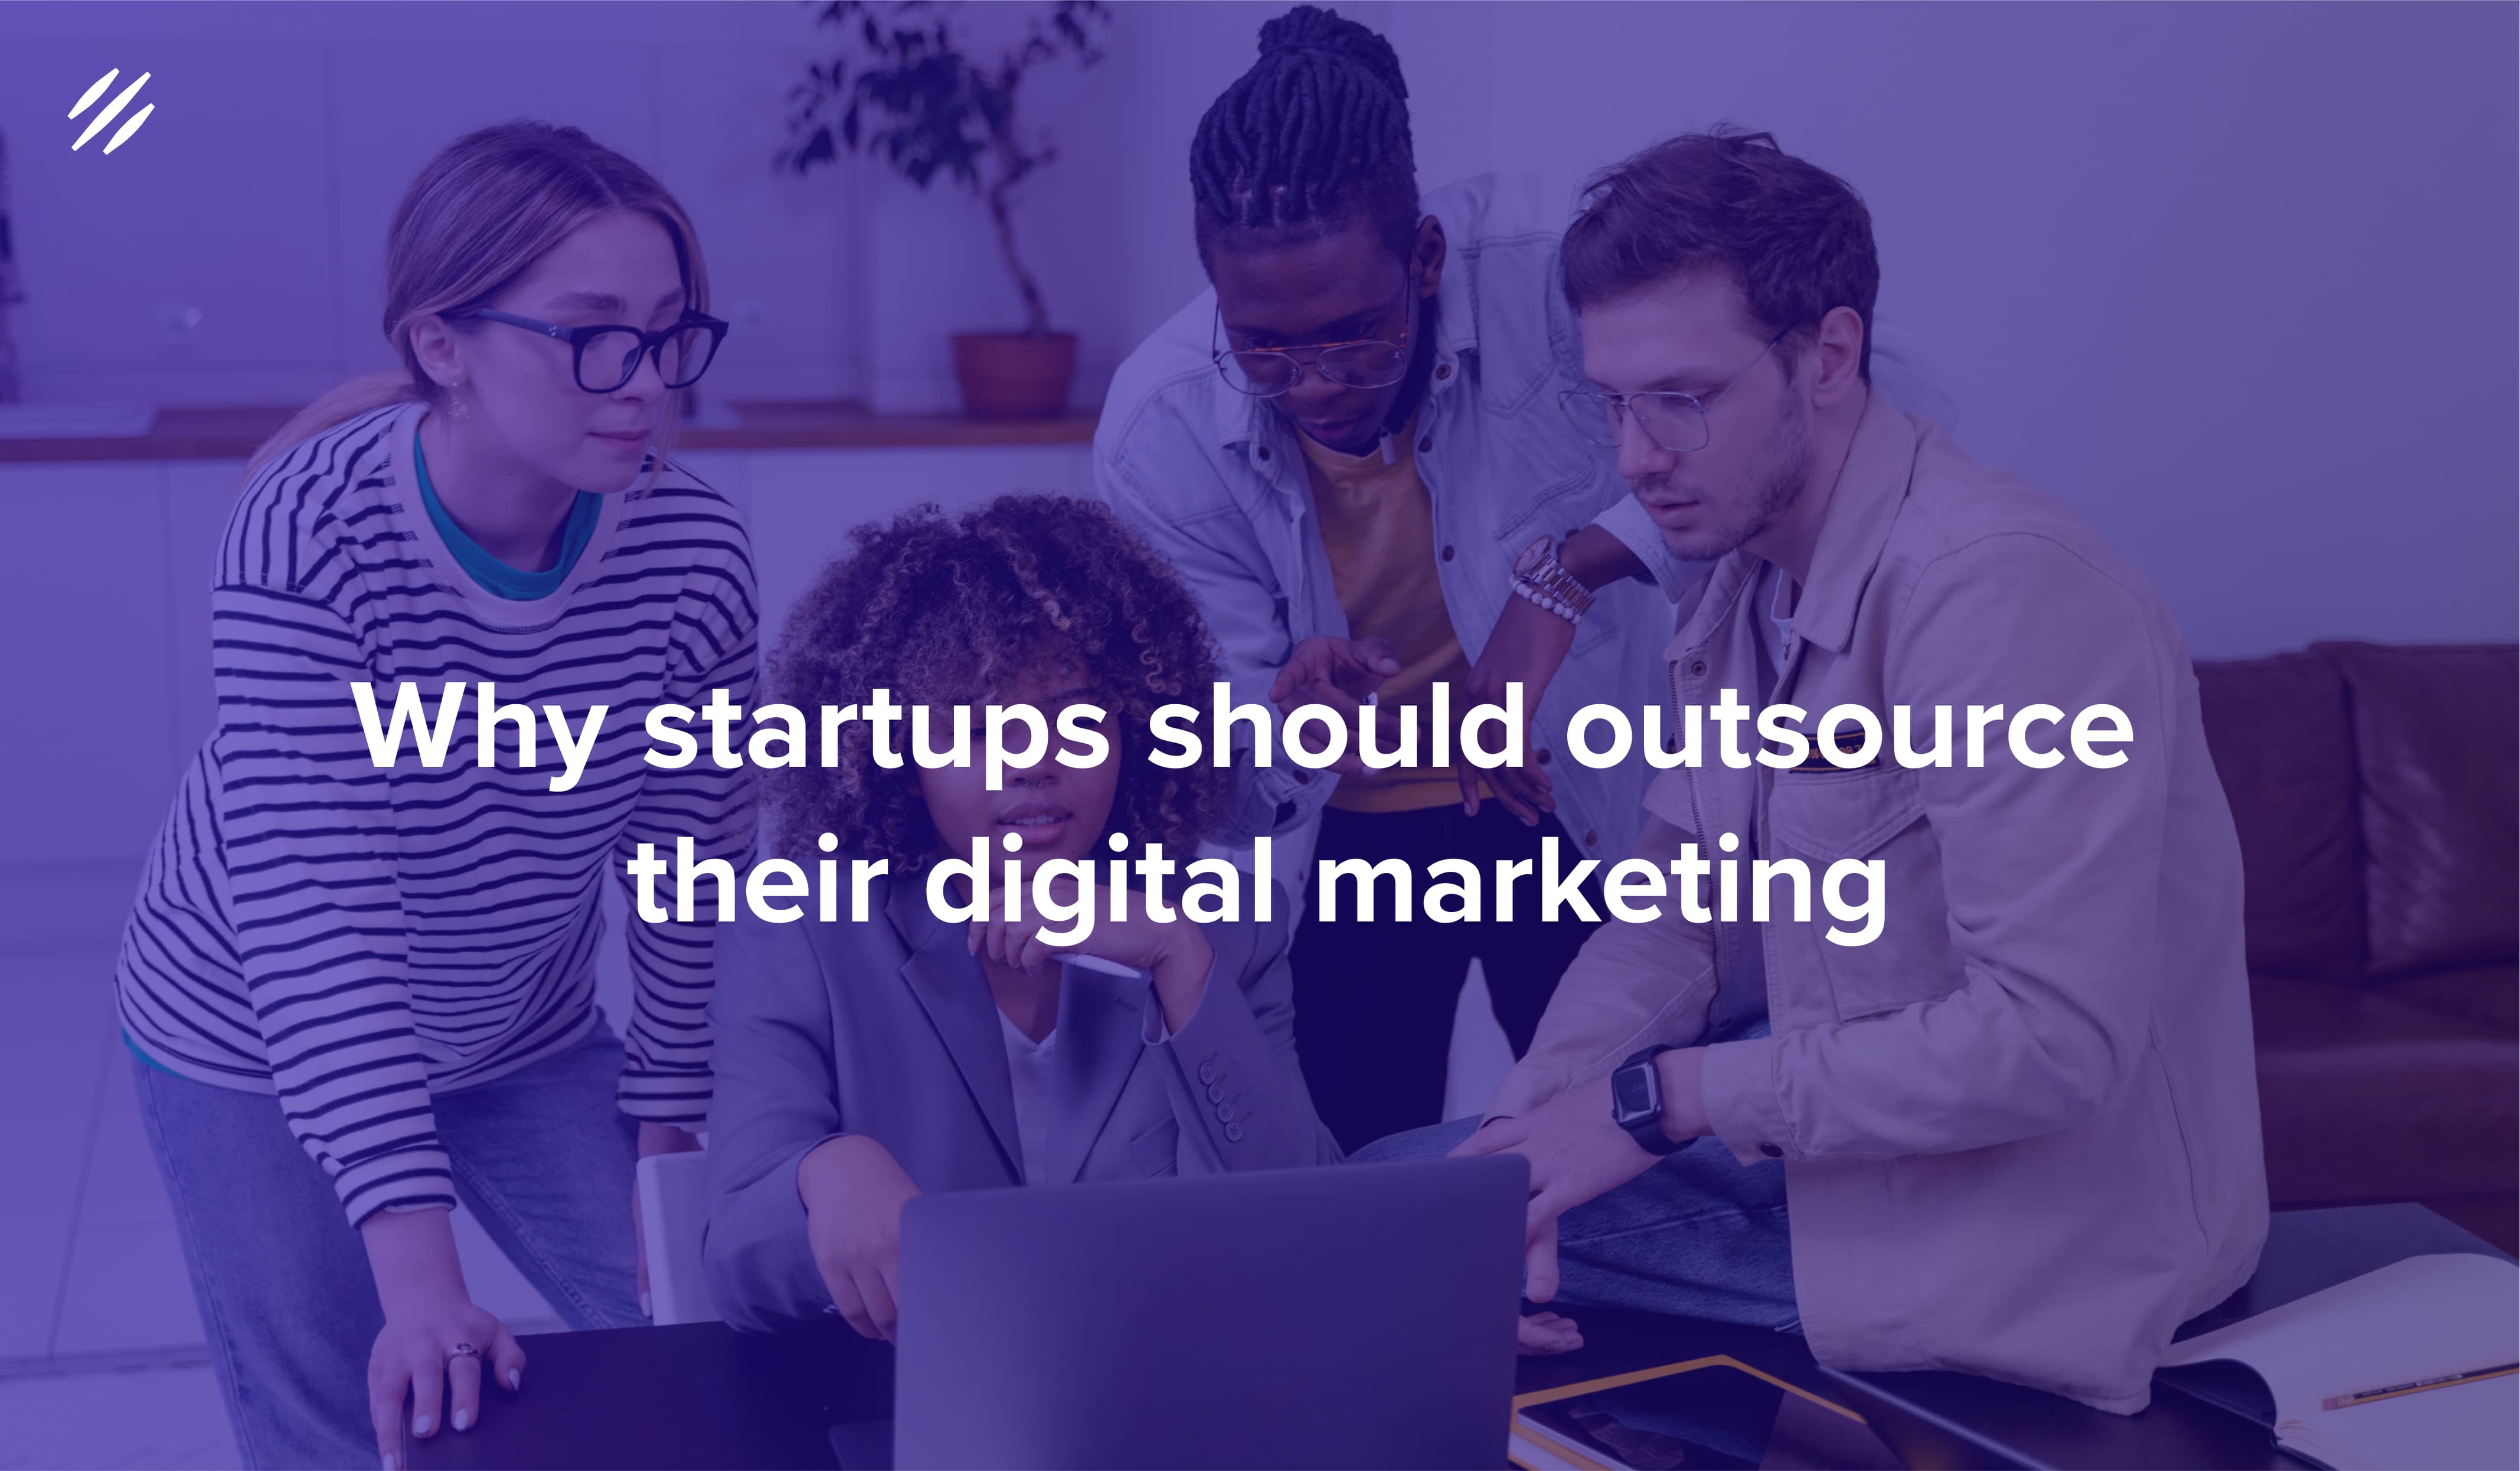 Should Startups Outsource Their Digital Marketing?